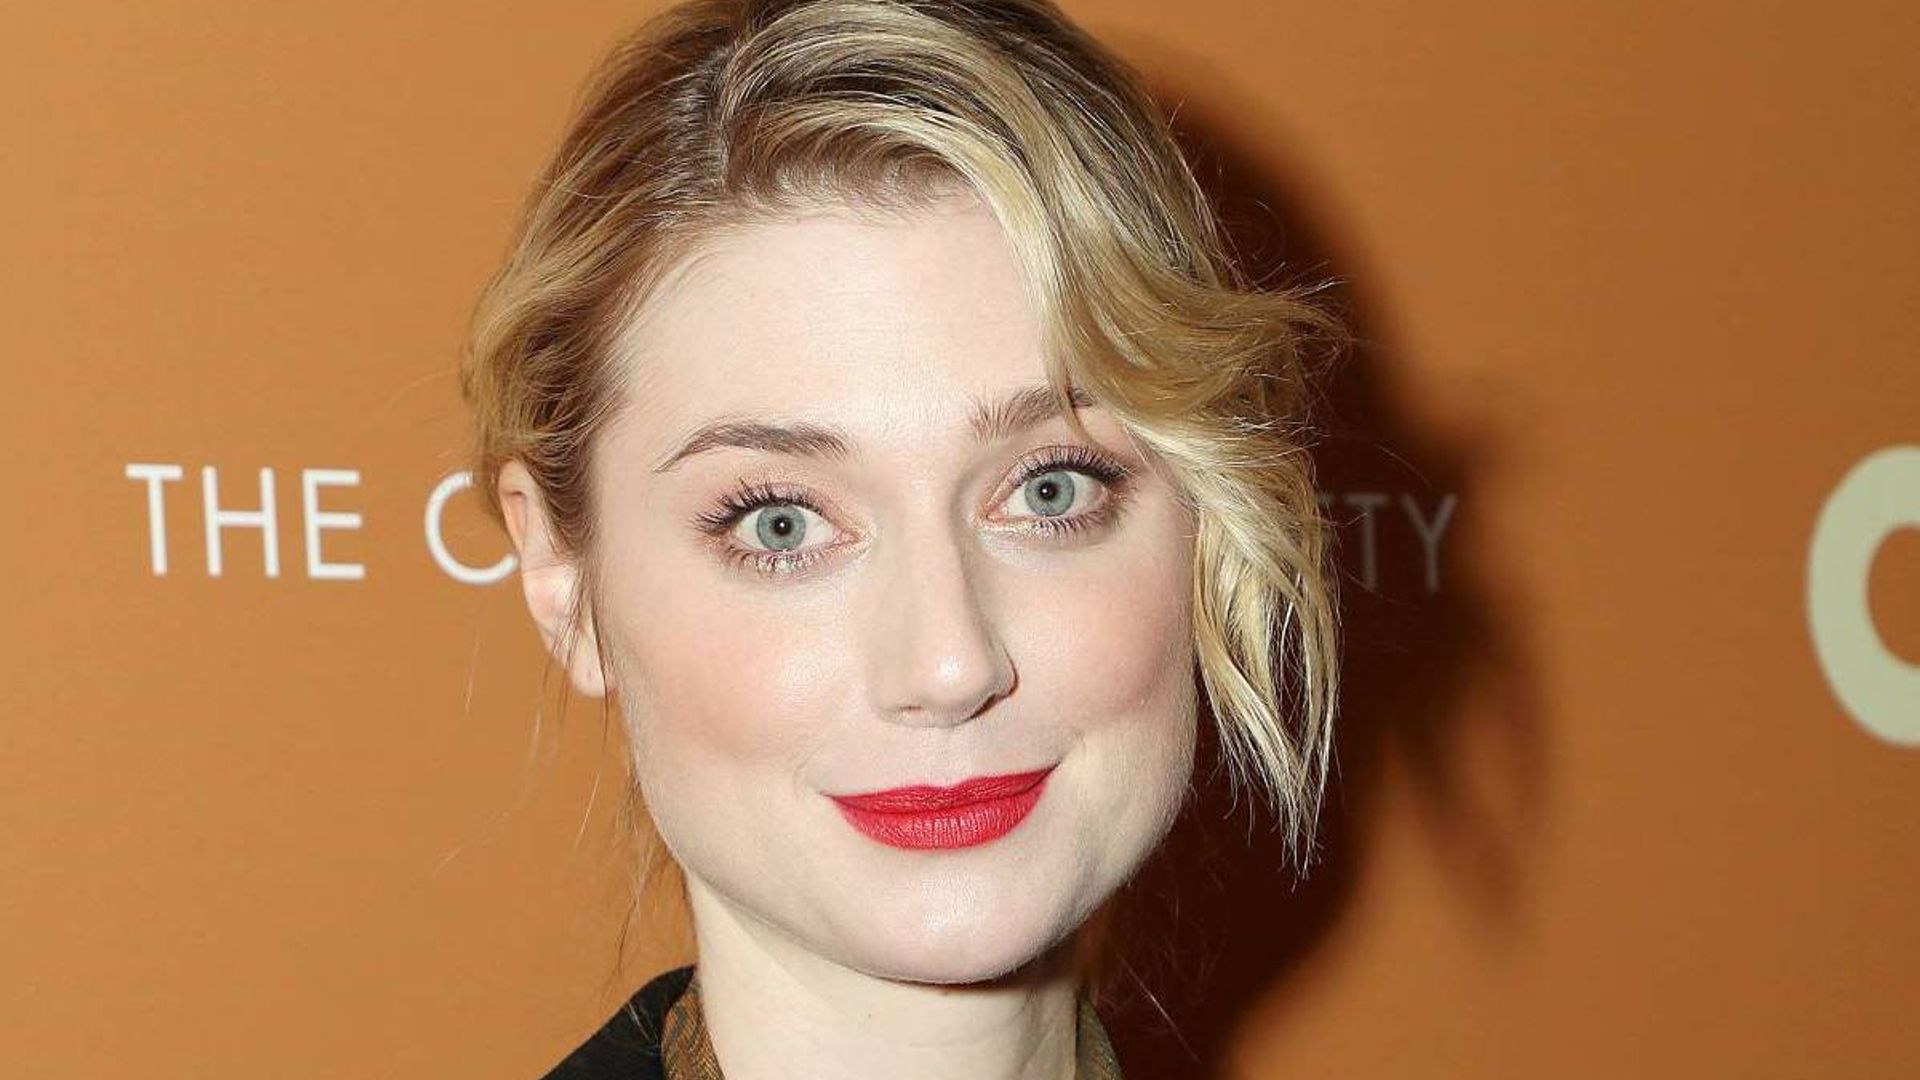 Everything you need to know about The Crown’s new Princess Diana, Elizabeth Debicki